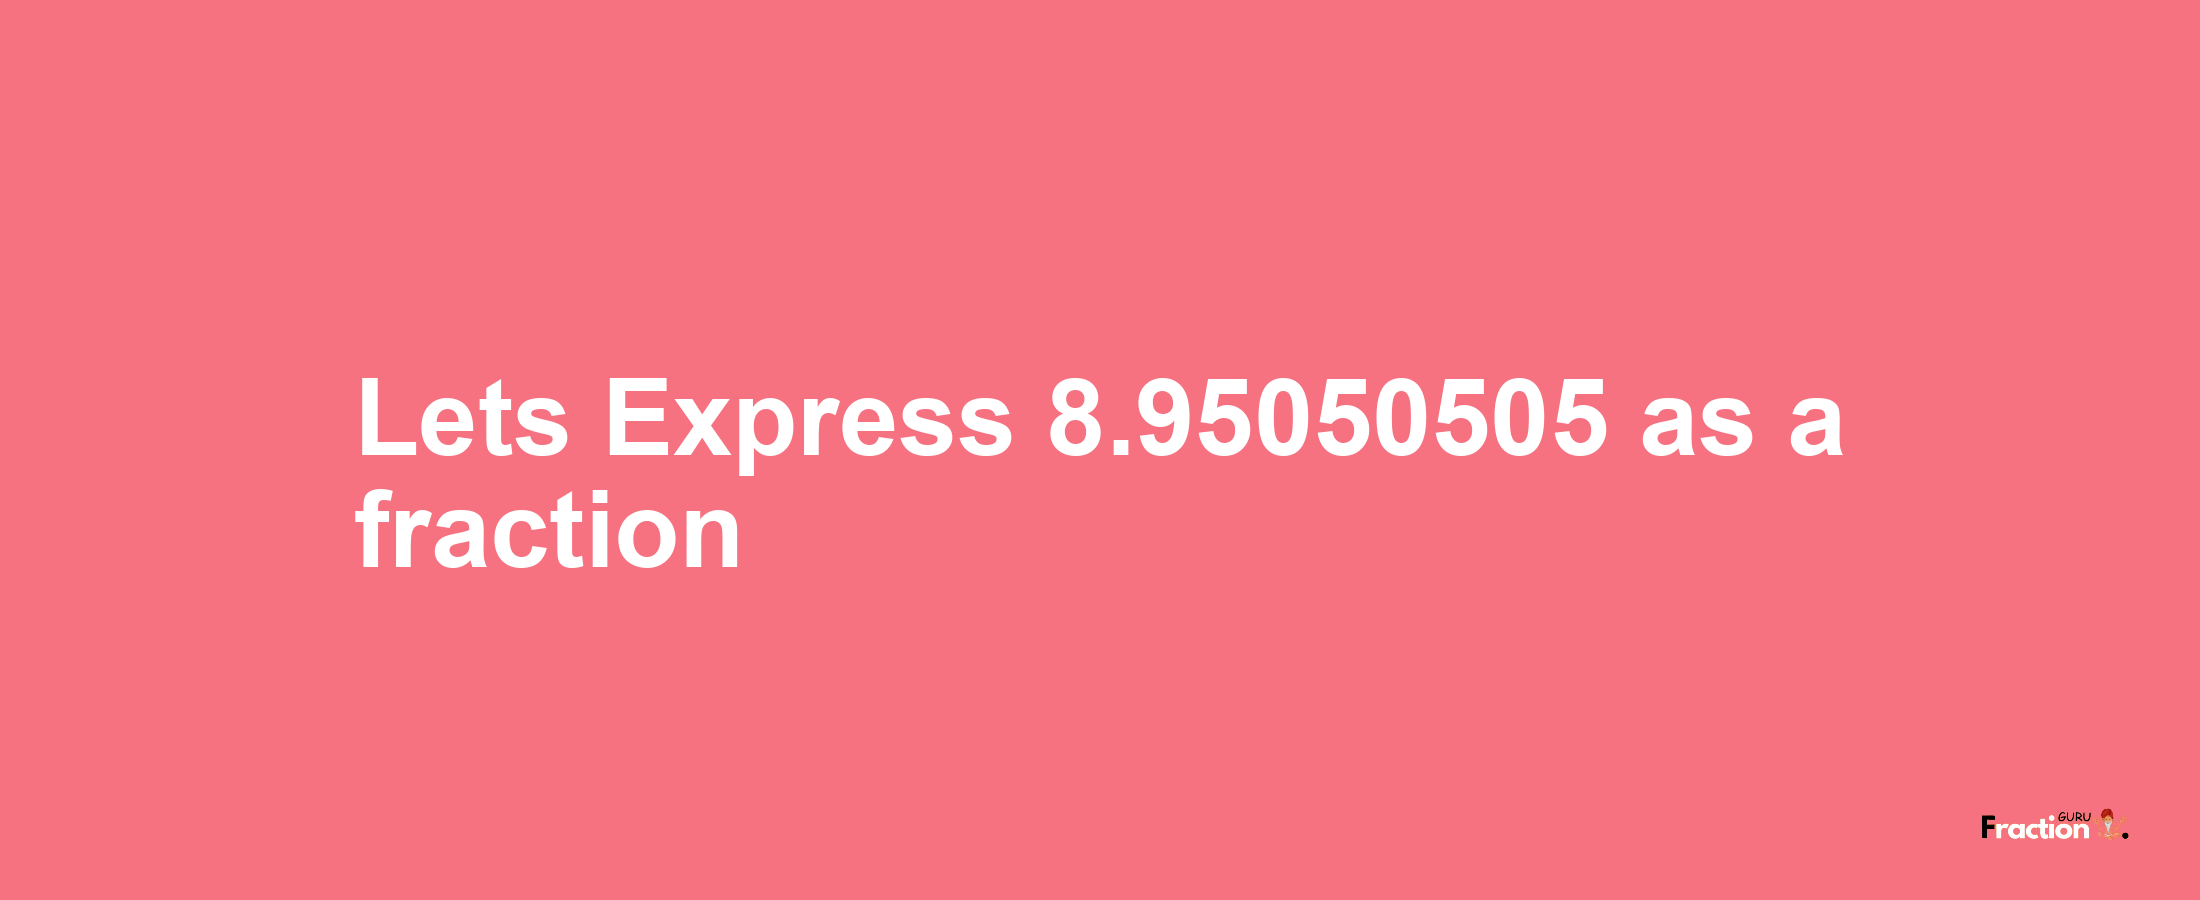 Lets Express 8.95050505 as afraction